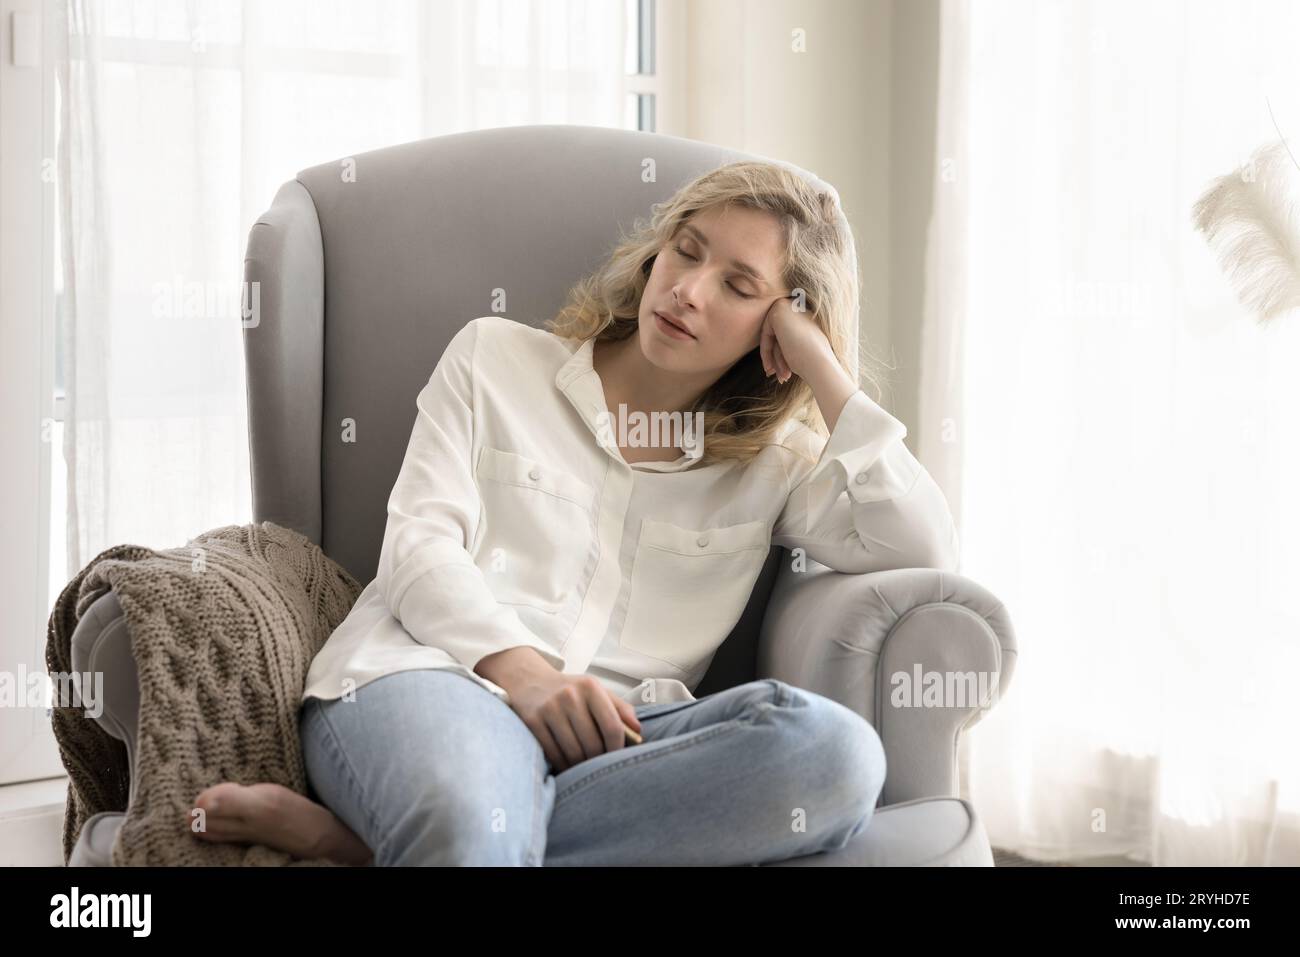 Relaxed calm woman have daytime rest seated on armchair Stock Photo